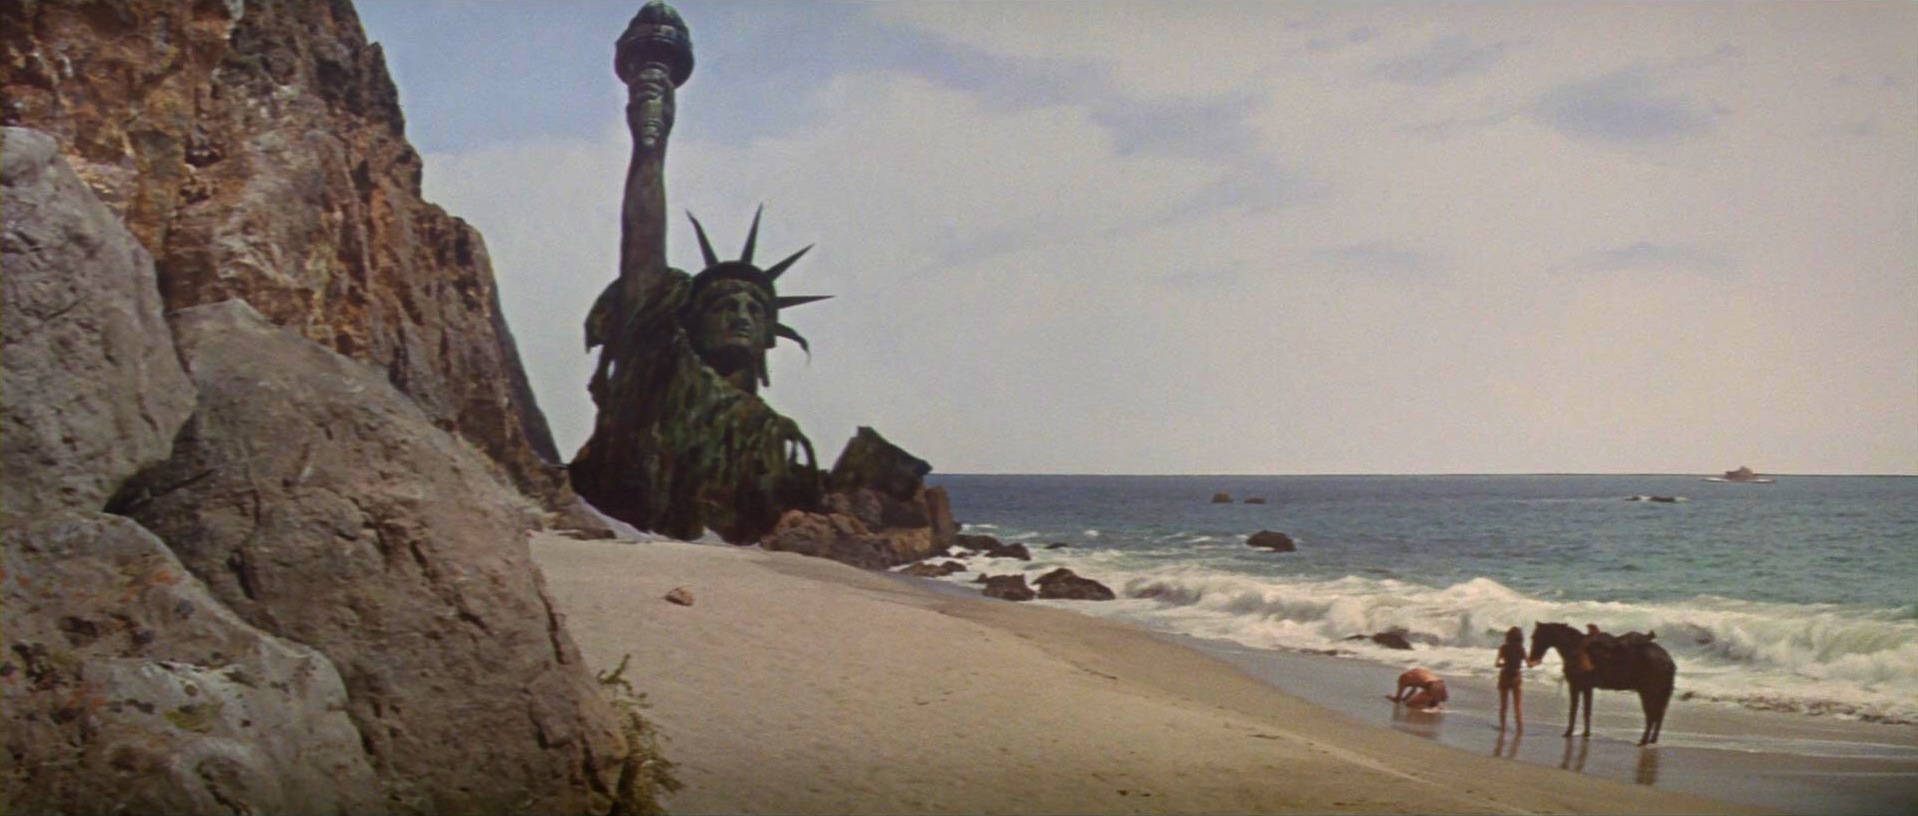 planet-of-the-apes-statue-of-liberty-blu-ray-disc-screencap-hd-1080p-05.jpg